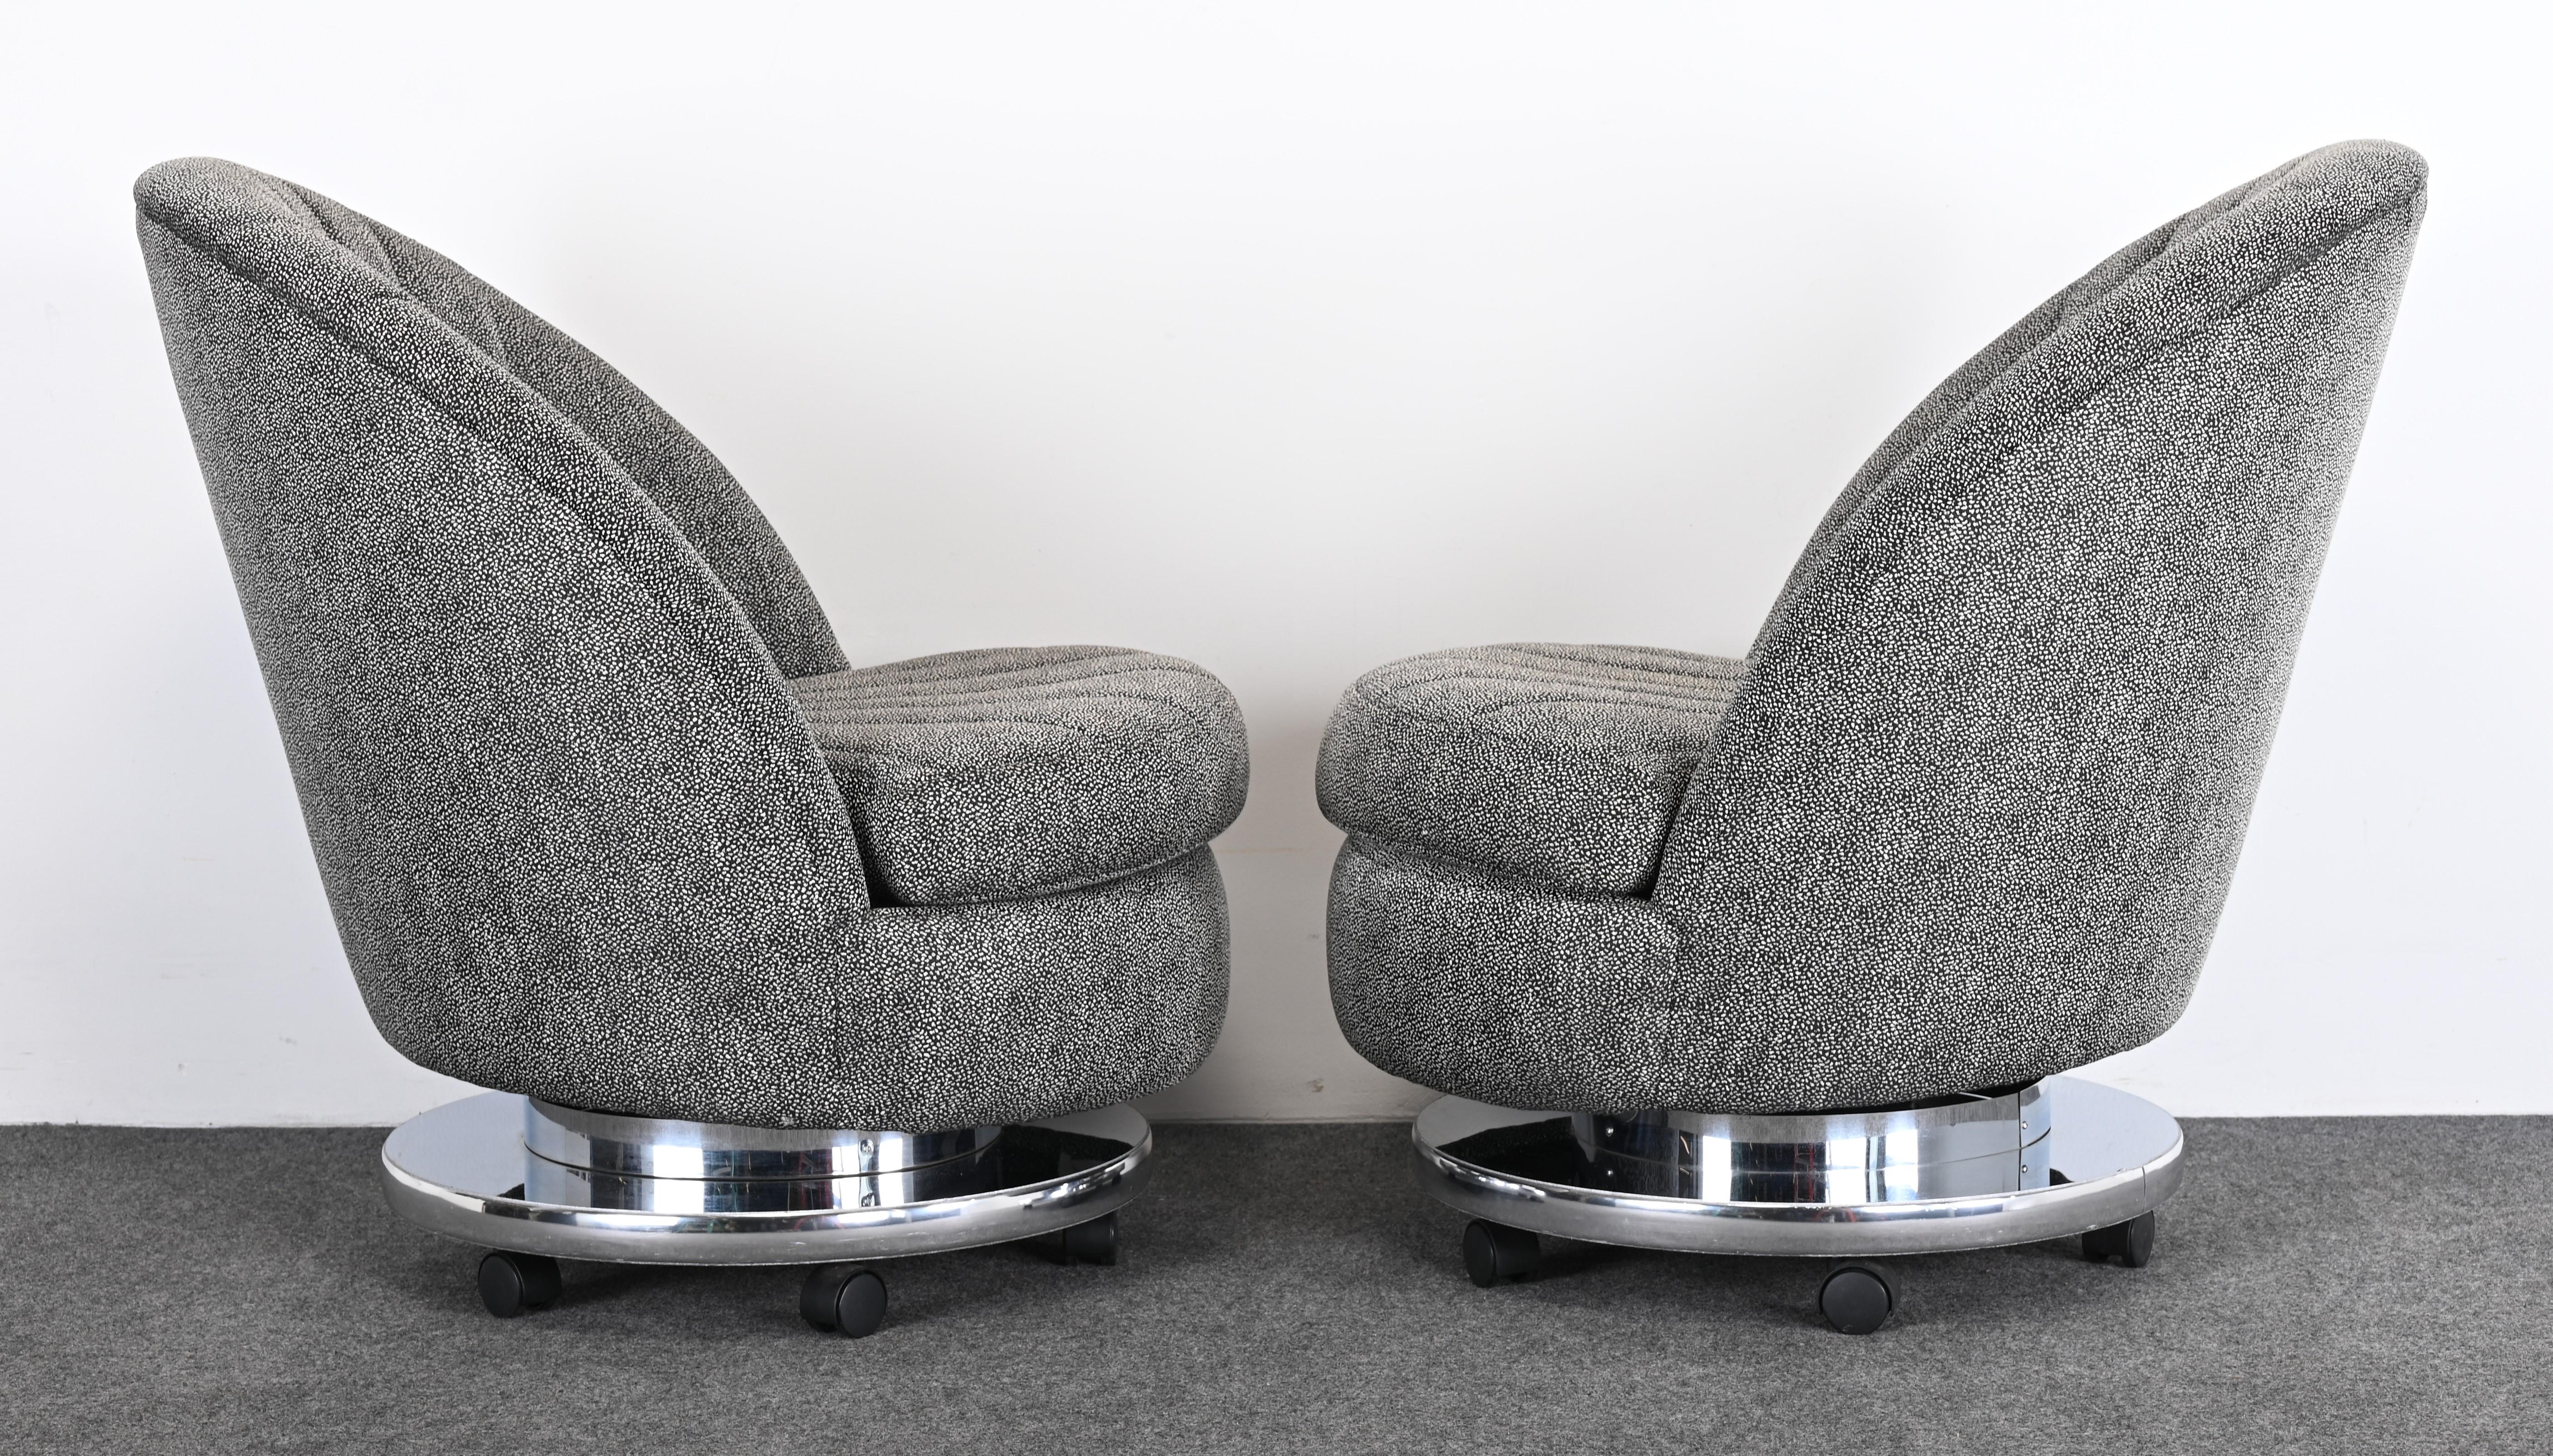 Pair of Milo Baughman Swivel and Tilt Chairs for Thayer Coggin, 1995 For Sale 5